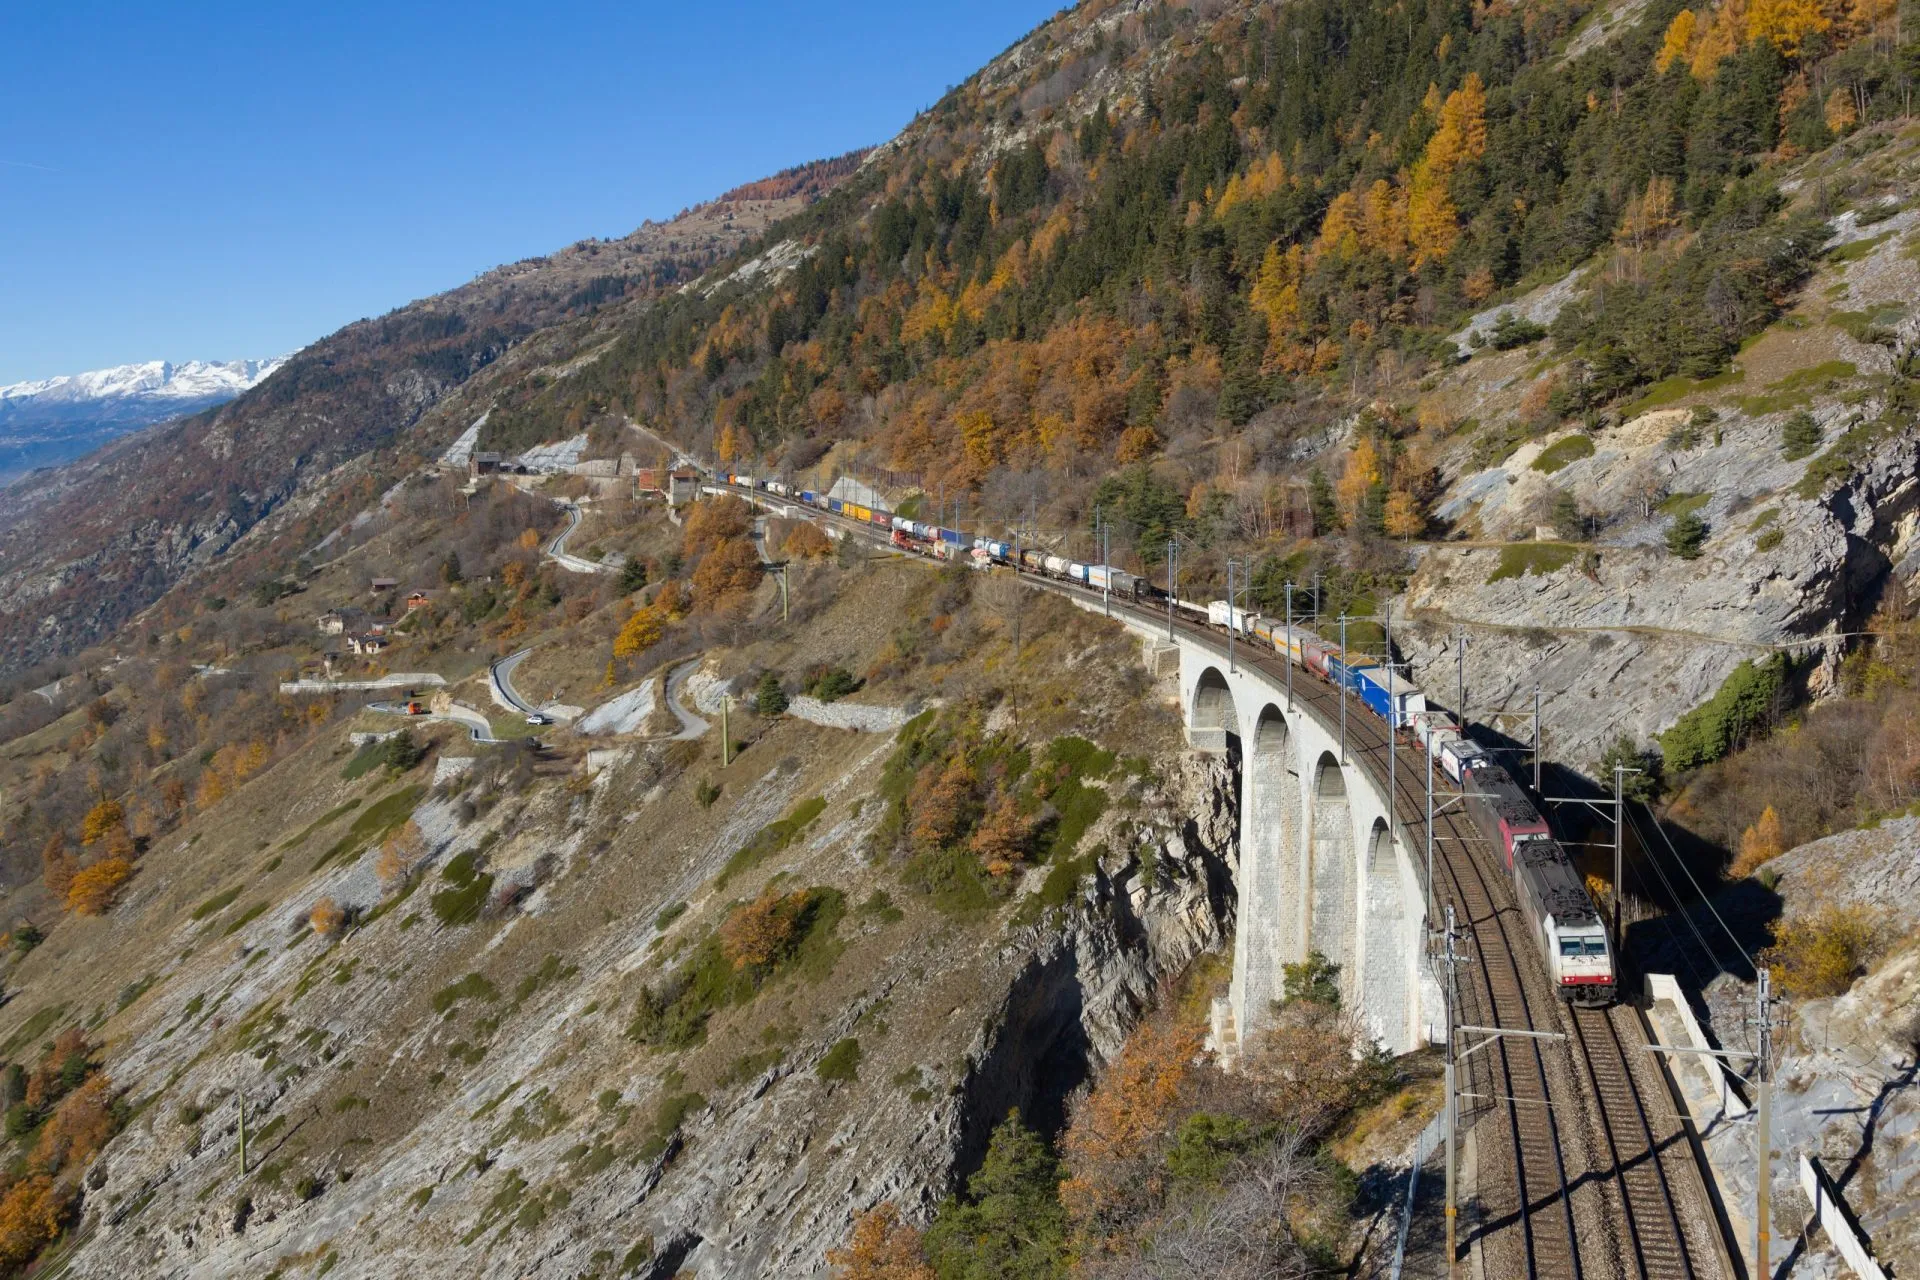 Lotschberg railway is one of the most important in the alps